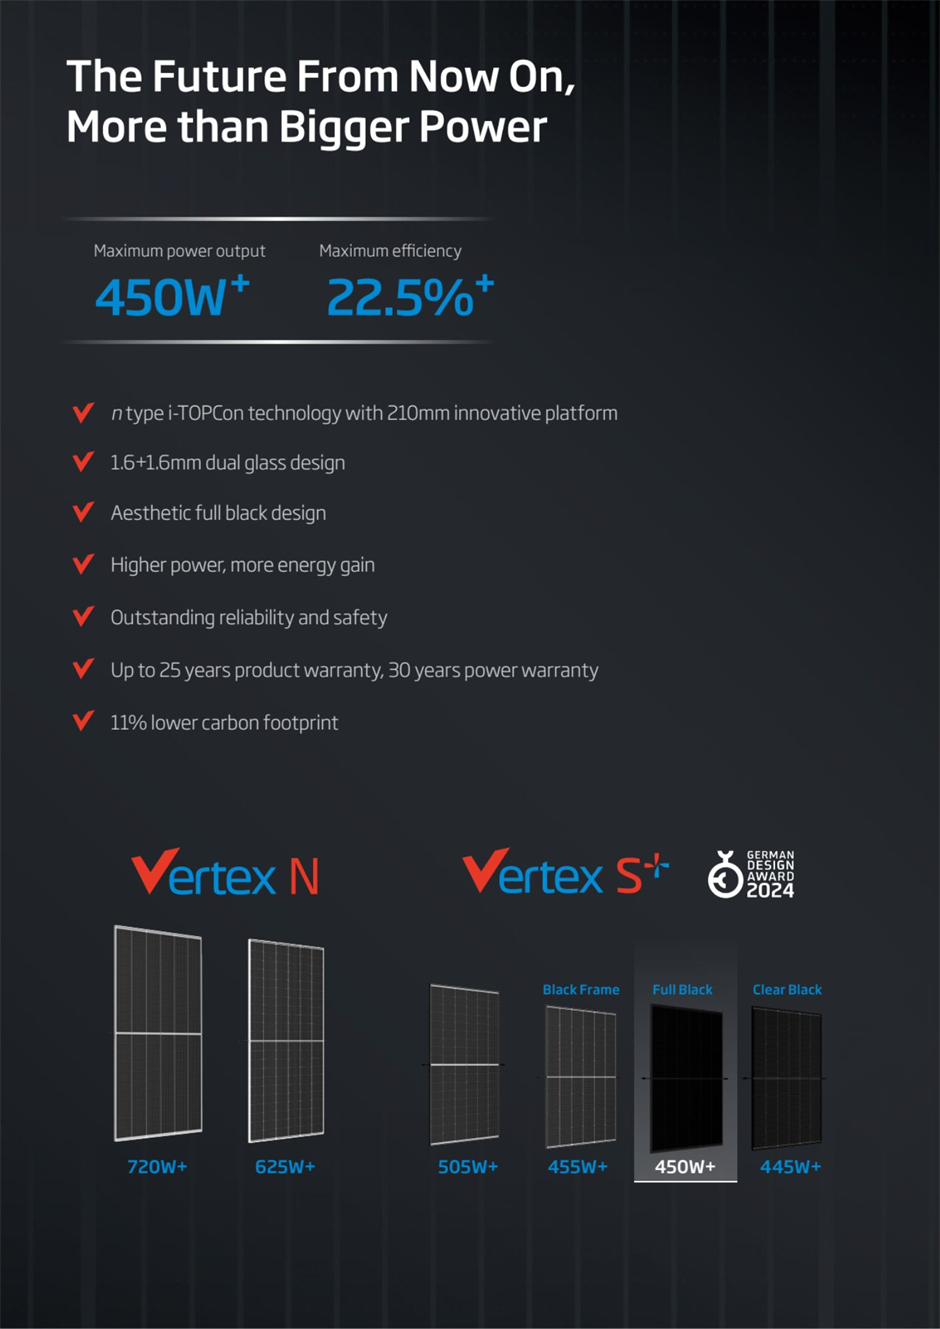 Summary of Vertex S+ Full Black n-type i-TOPCon dual-glass solar module’s key features, making it an ideal solution for aesthetically-minded homeowners seeking a high-end rooftop.
